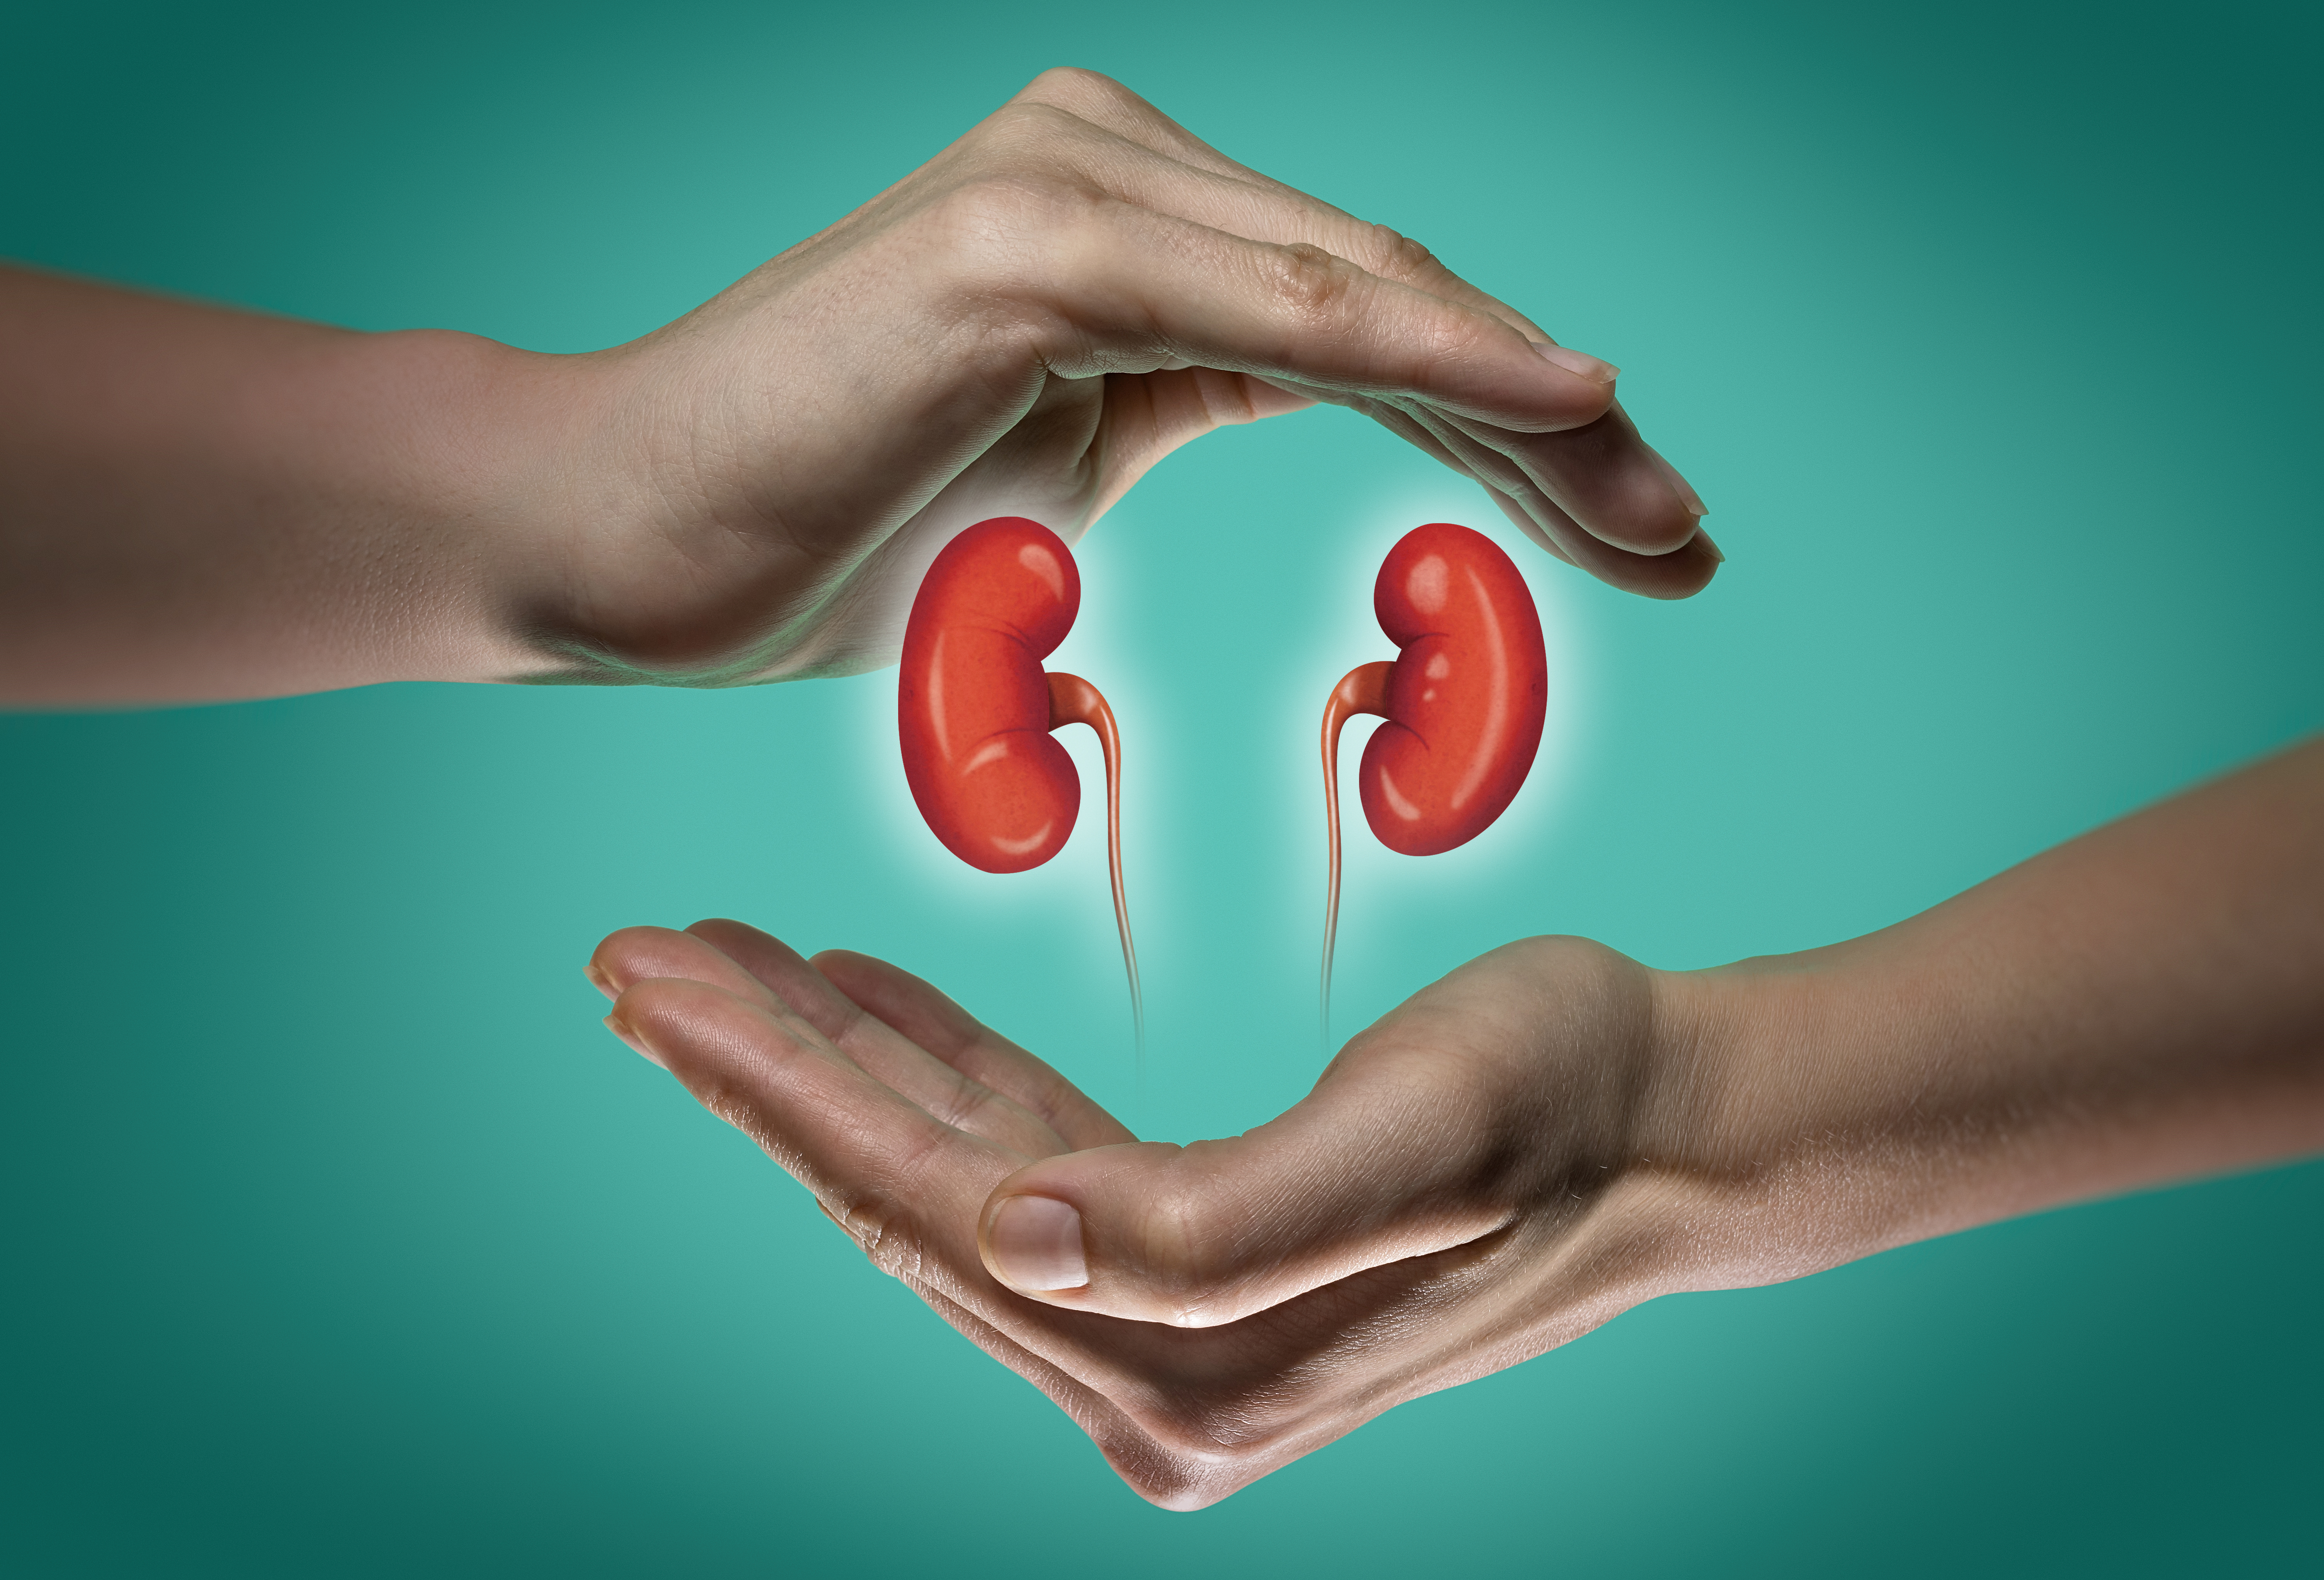 best form of magnesium for kidney disease